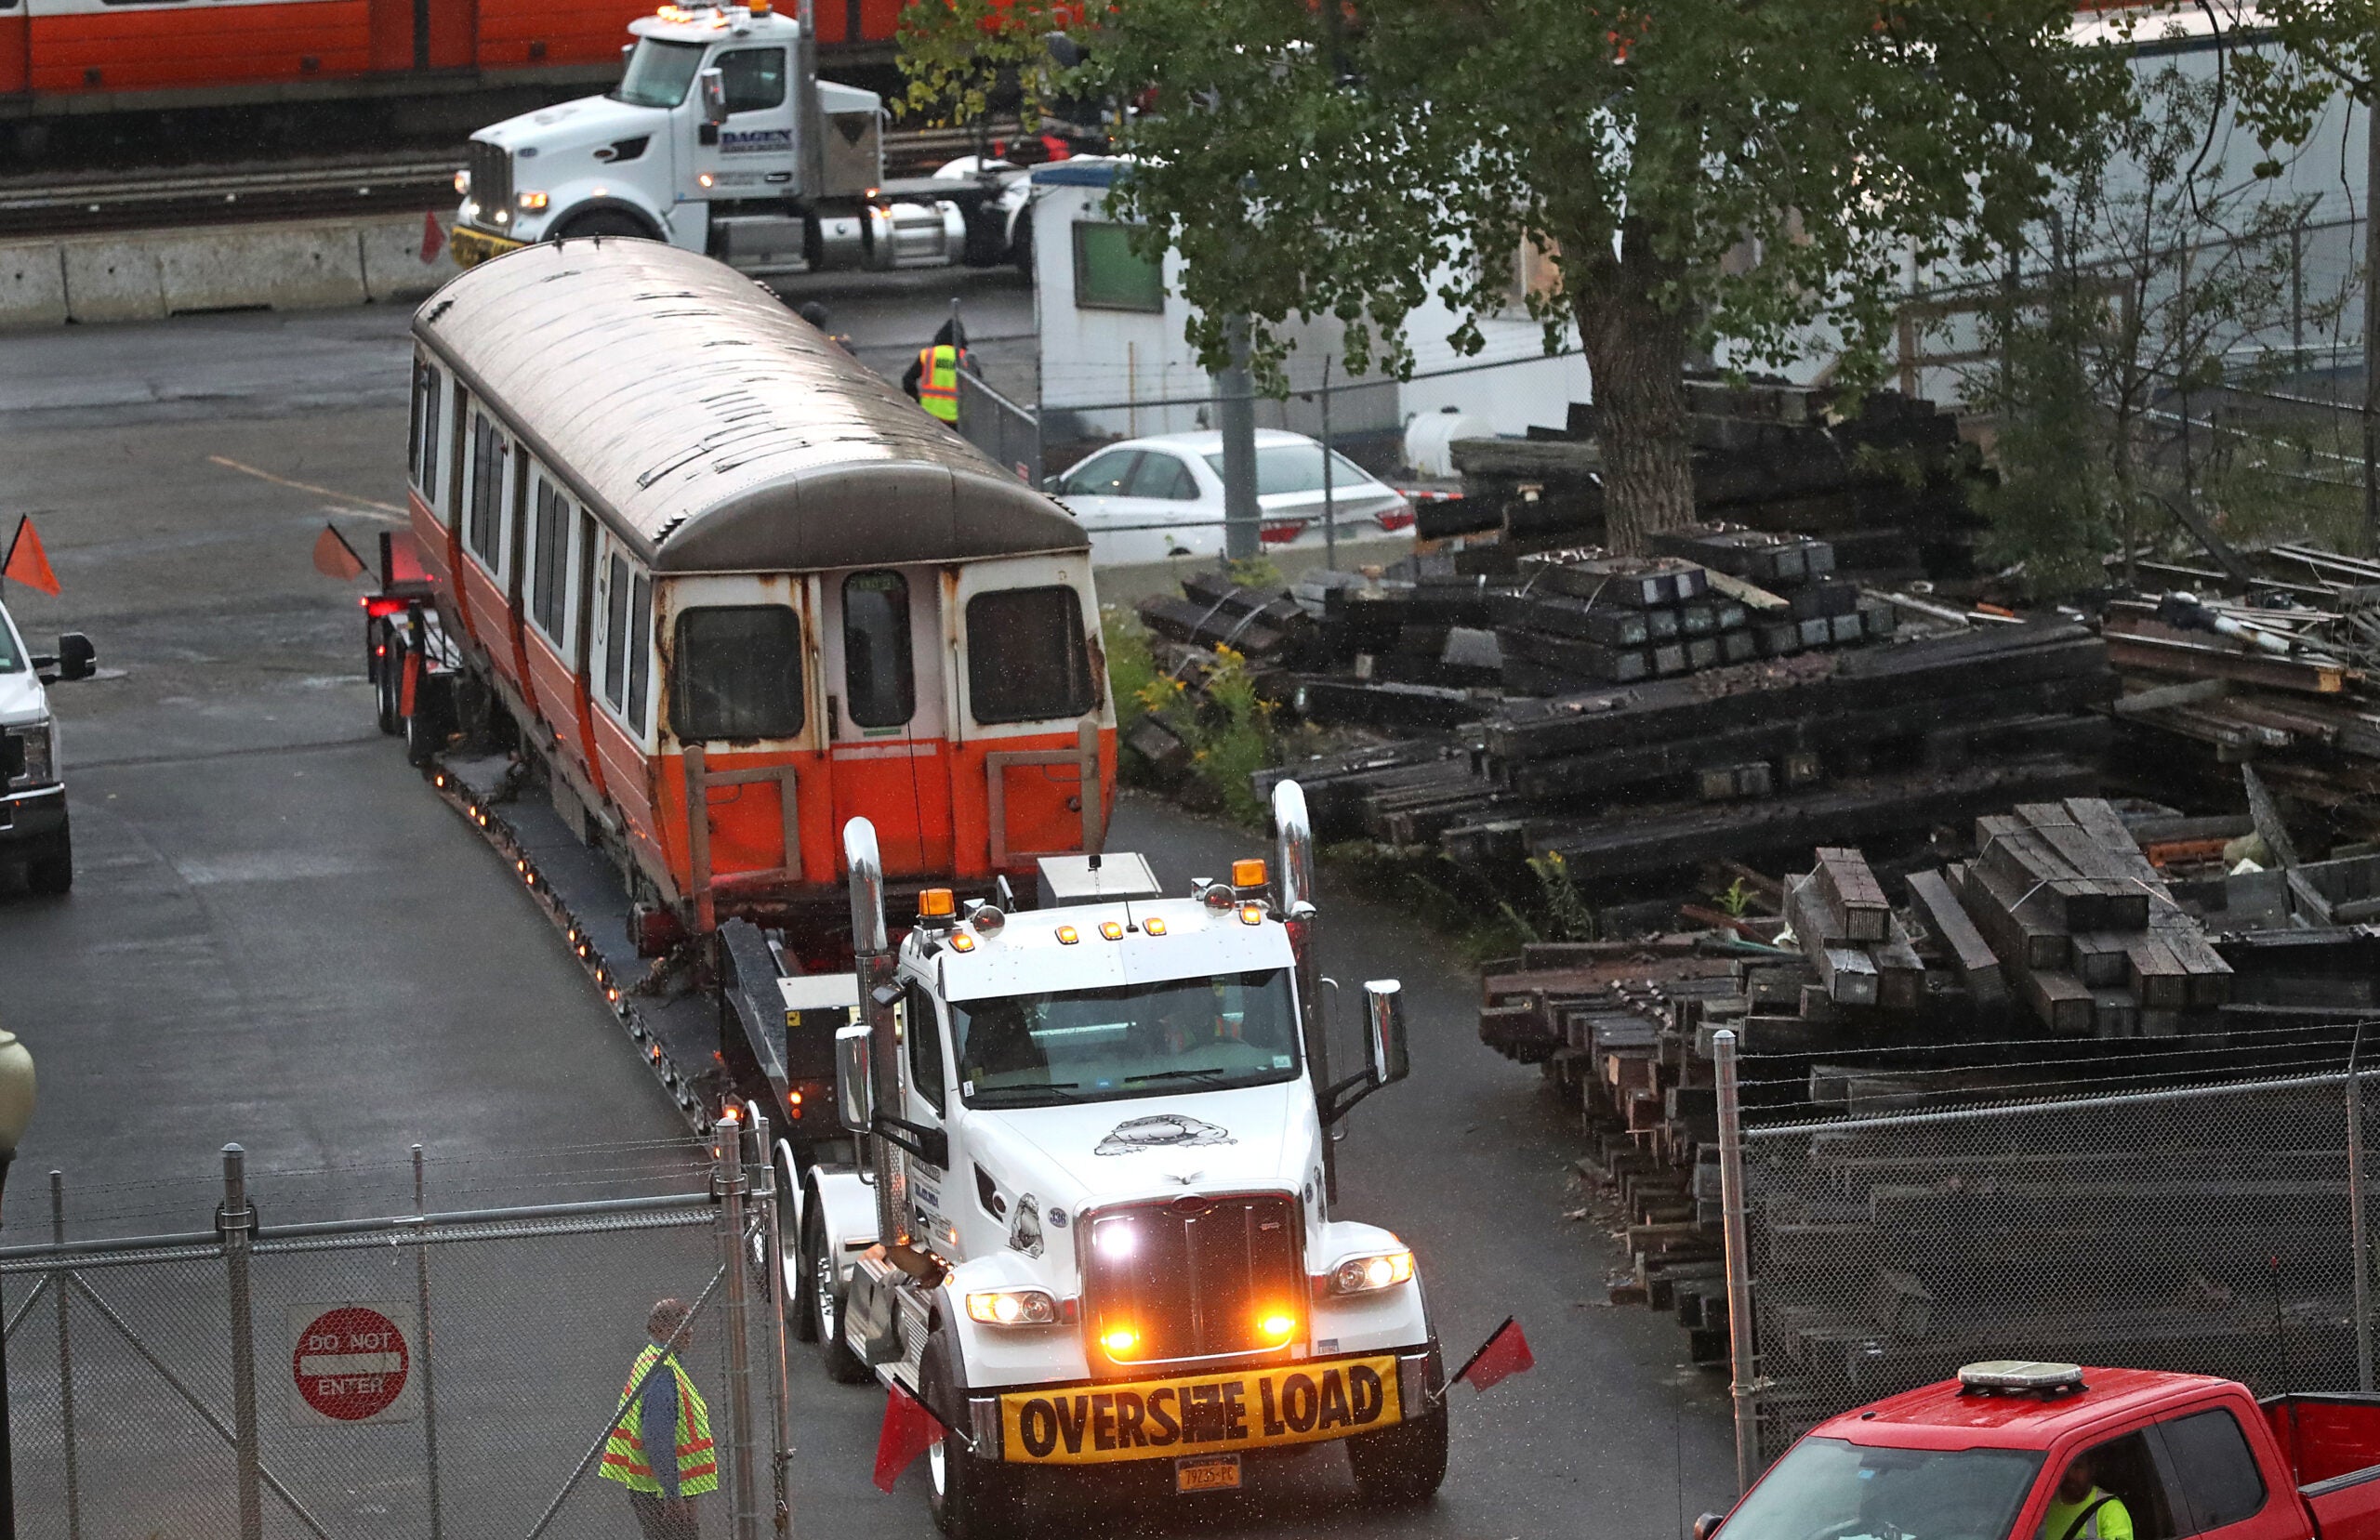 Photos: See the old Orange Line trains head to the scrapyard